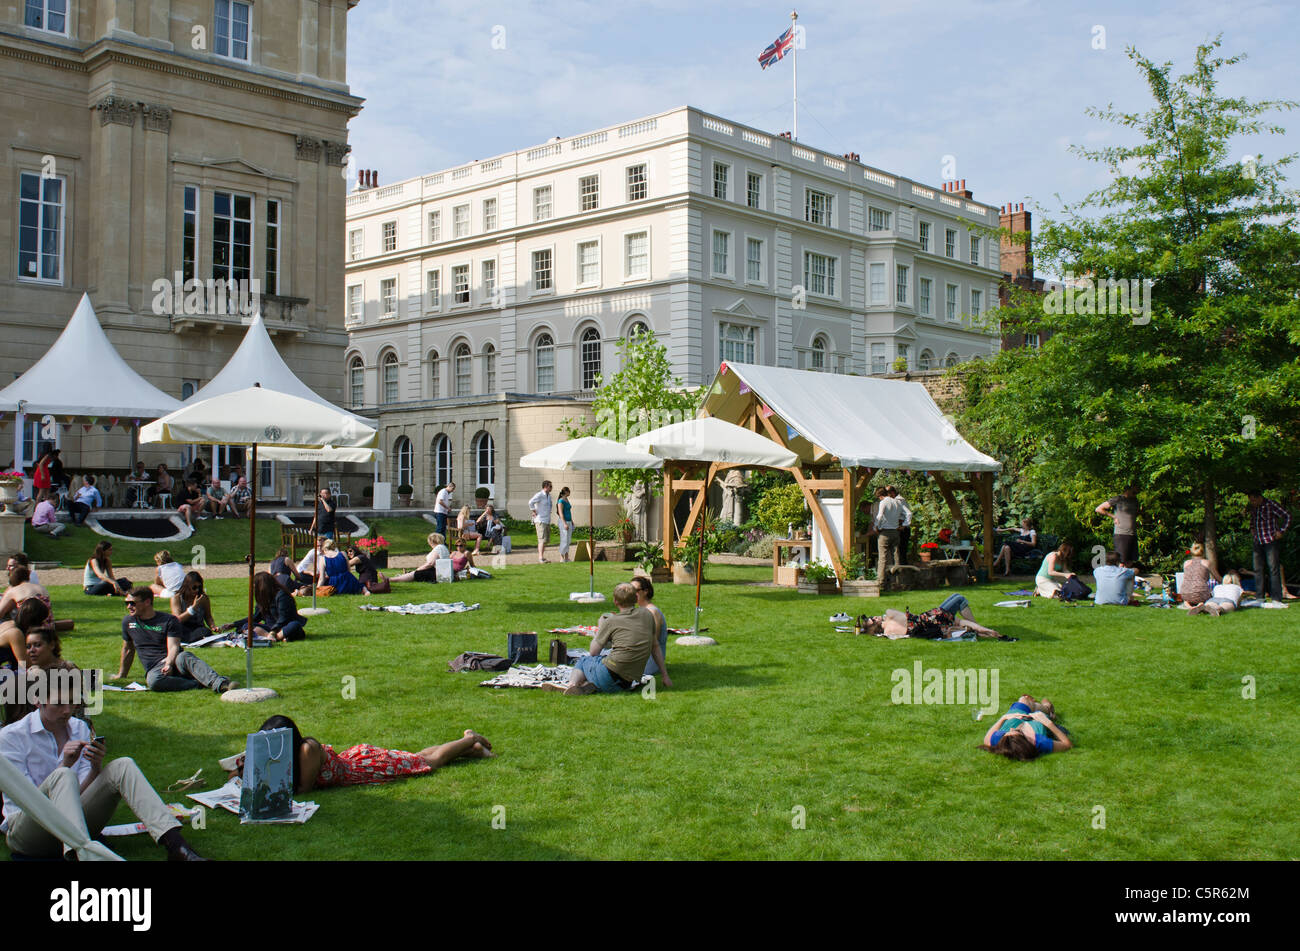 Prince Charles's Start initiative  for sustainable living. Lancaster House garden Stock Photo